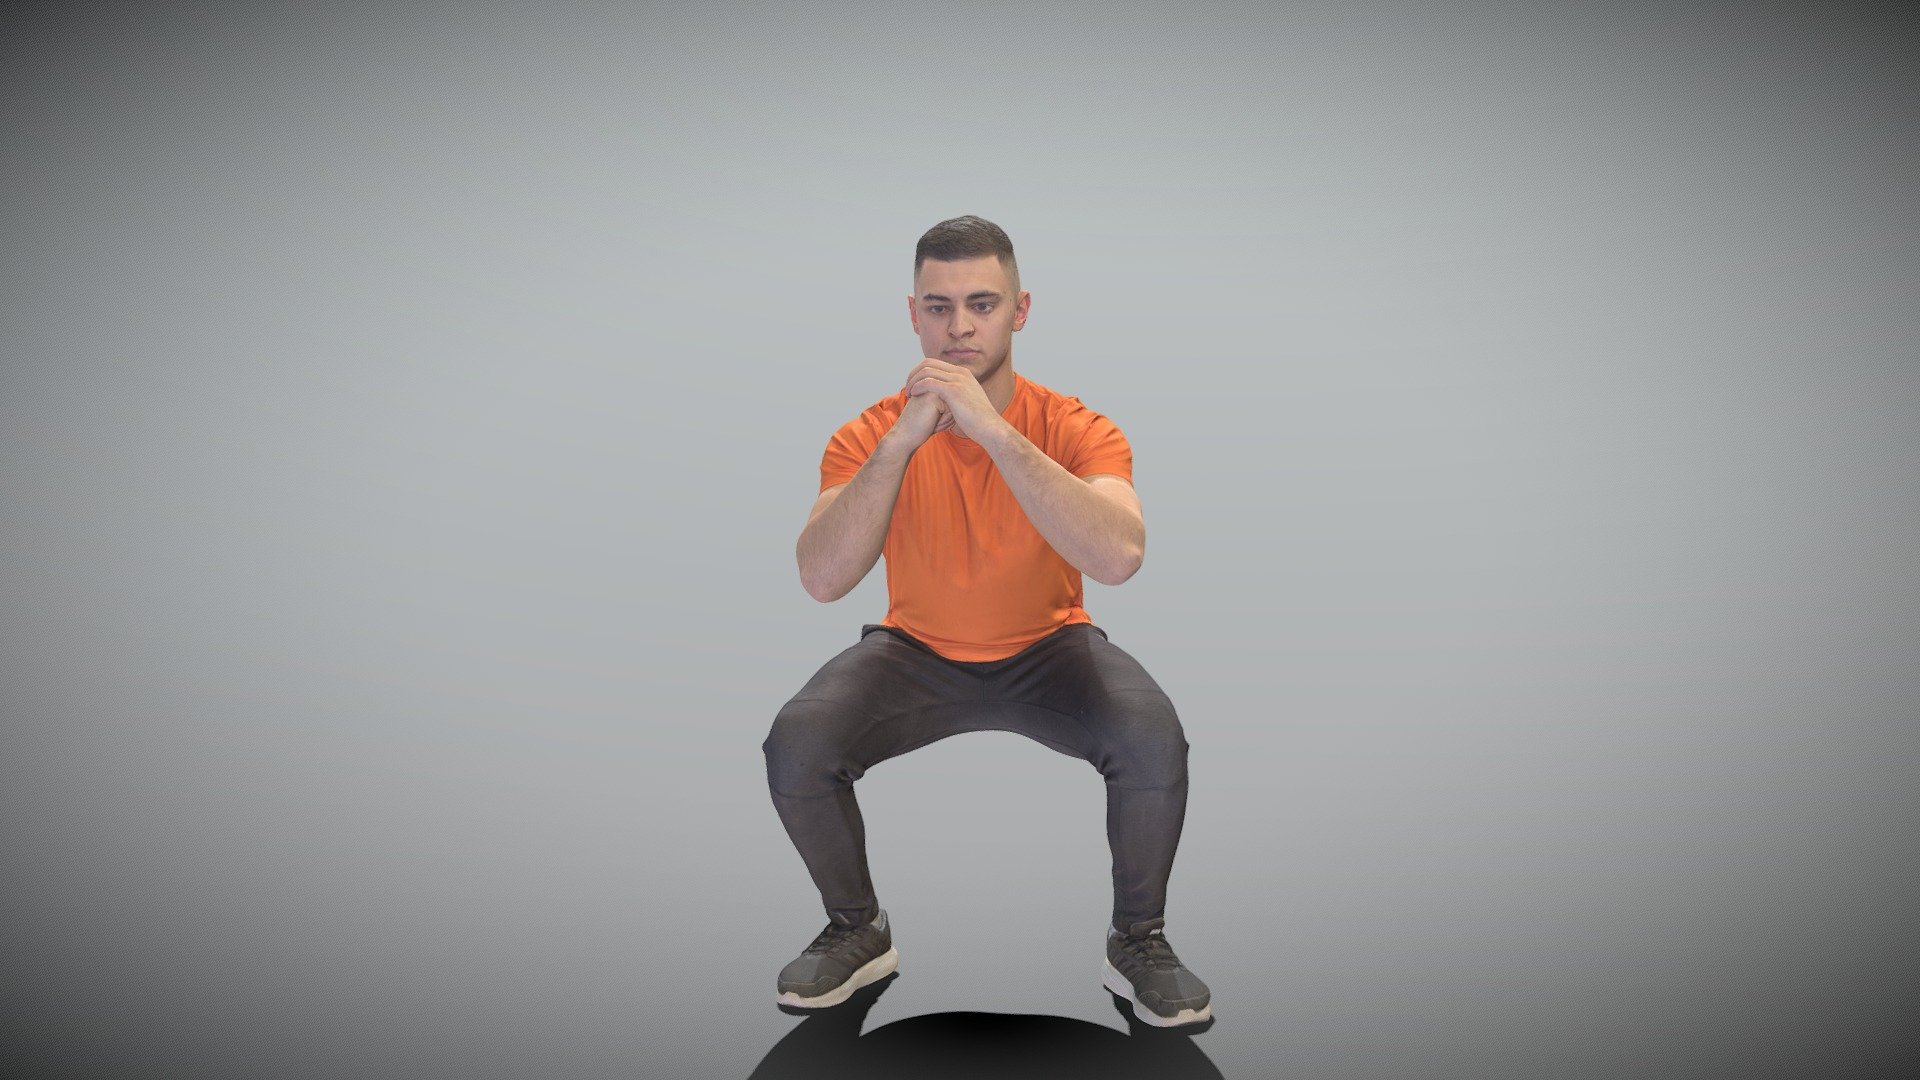 This is a true human size and detailed model of a sporty handsome young man of Caucasian appearance dressed in sportswear. The model is captured in casual pose to be perfectly matching various architectural and product visualizations, as a background or mid-sized character on a sports ground, gym, beach, VR/AR content, etc.

Technical characteristics:




digital double 3d scan model

decimated model (100k triangles)

sufficiently clean

PBR textures: Diffuse, Normal, Specular maps

non-overlapping UV map

Download package includes Cinema 4D project file with Redshift shader, OBJ, FBX files, which are applicable for 3ds Max, Maya, Unreal Engine, Unity, Blender, etc. All the textures included into the main archive.

BONUSE: in this package you will also get a high-poly (.ztl tool) clean and retopologized automatically via ZRemesher 3d model in zBrush, thus youll be able to make your own editing of the purchased 3d model.

3D EVERYTHING - Man doing squats 346 - Buy Royalty Free 3D model by deep3dstudio 3d model